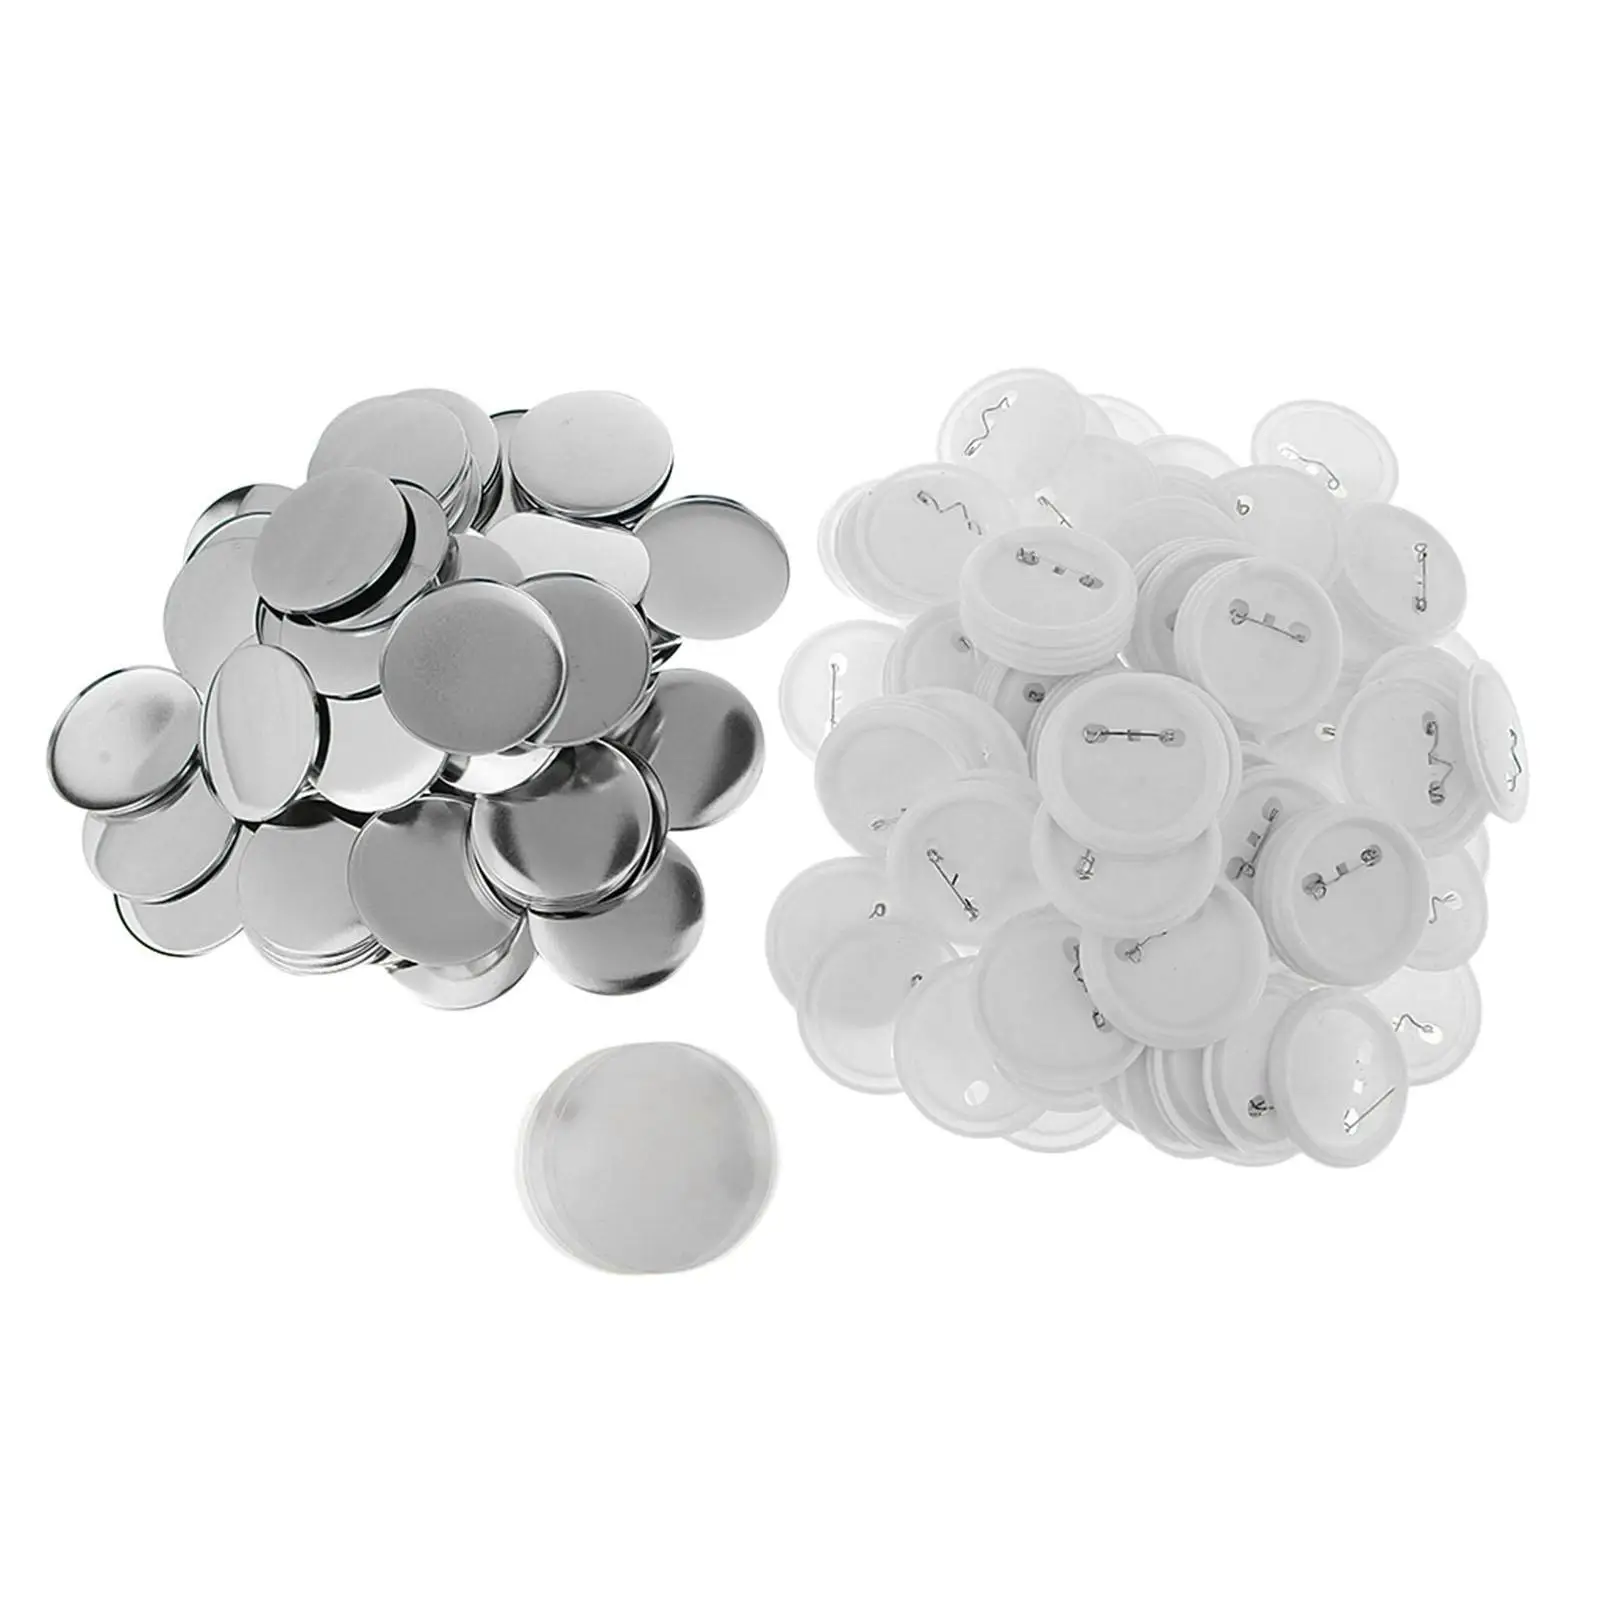 100 Sets Blank Button Making Supplies for Button Maker Machine Empty DIY Pin